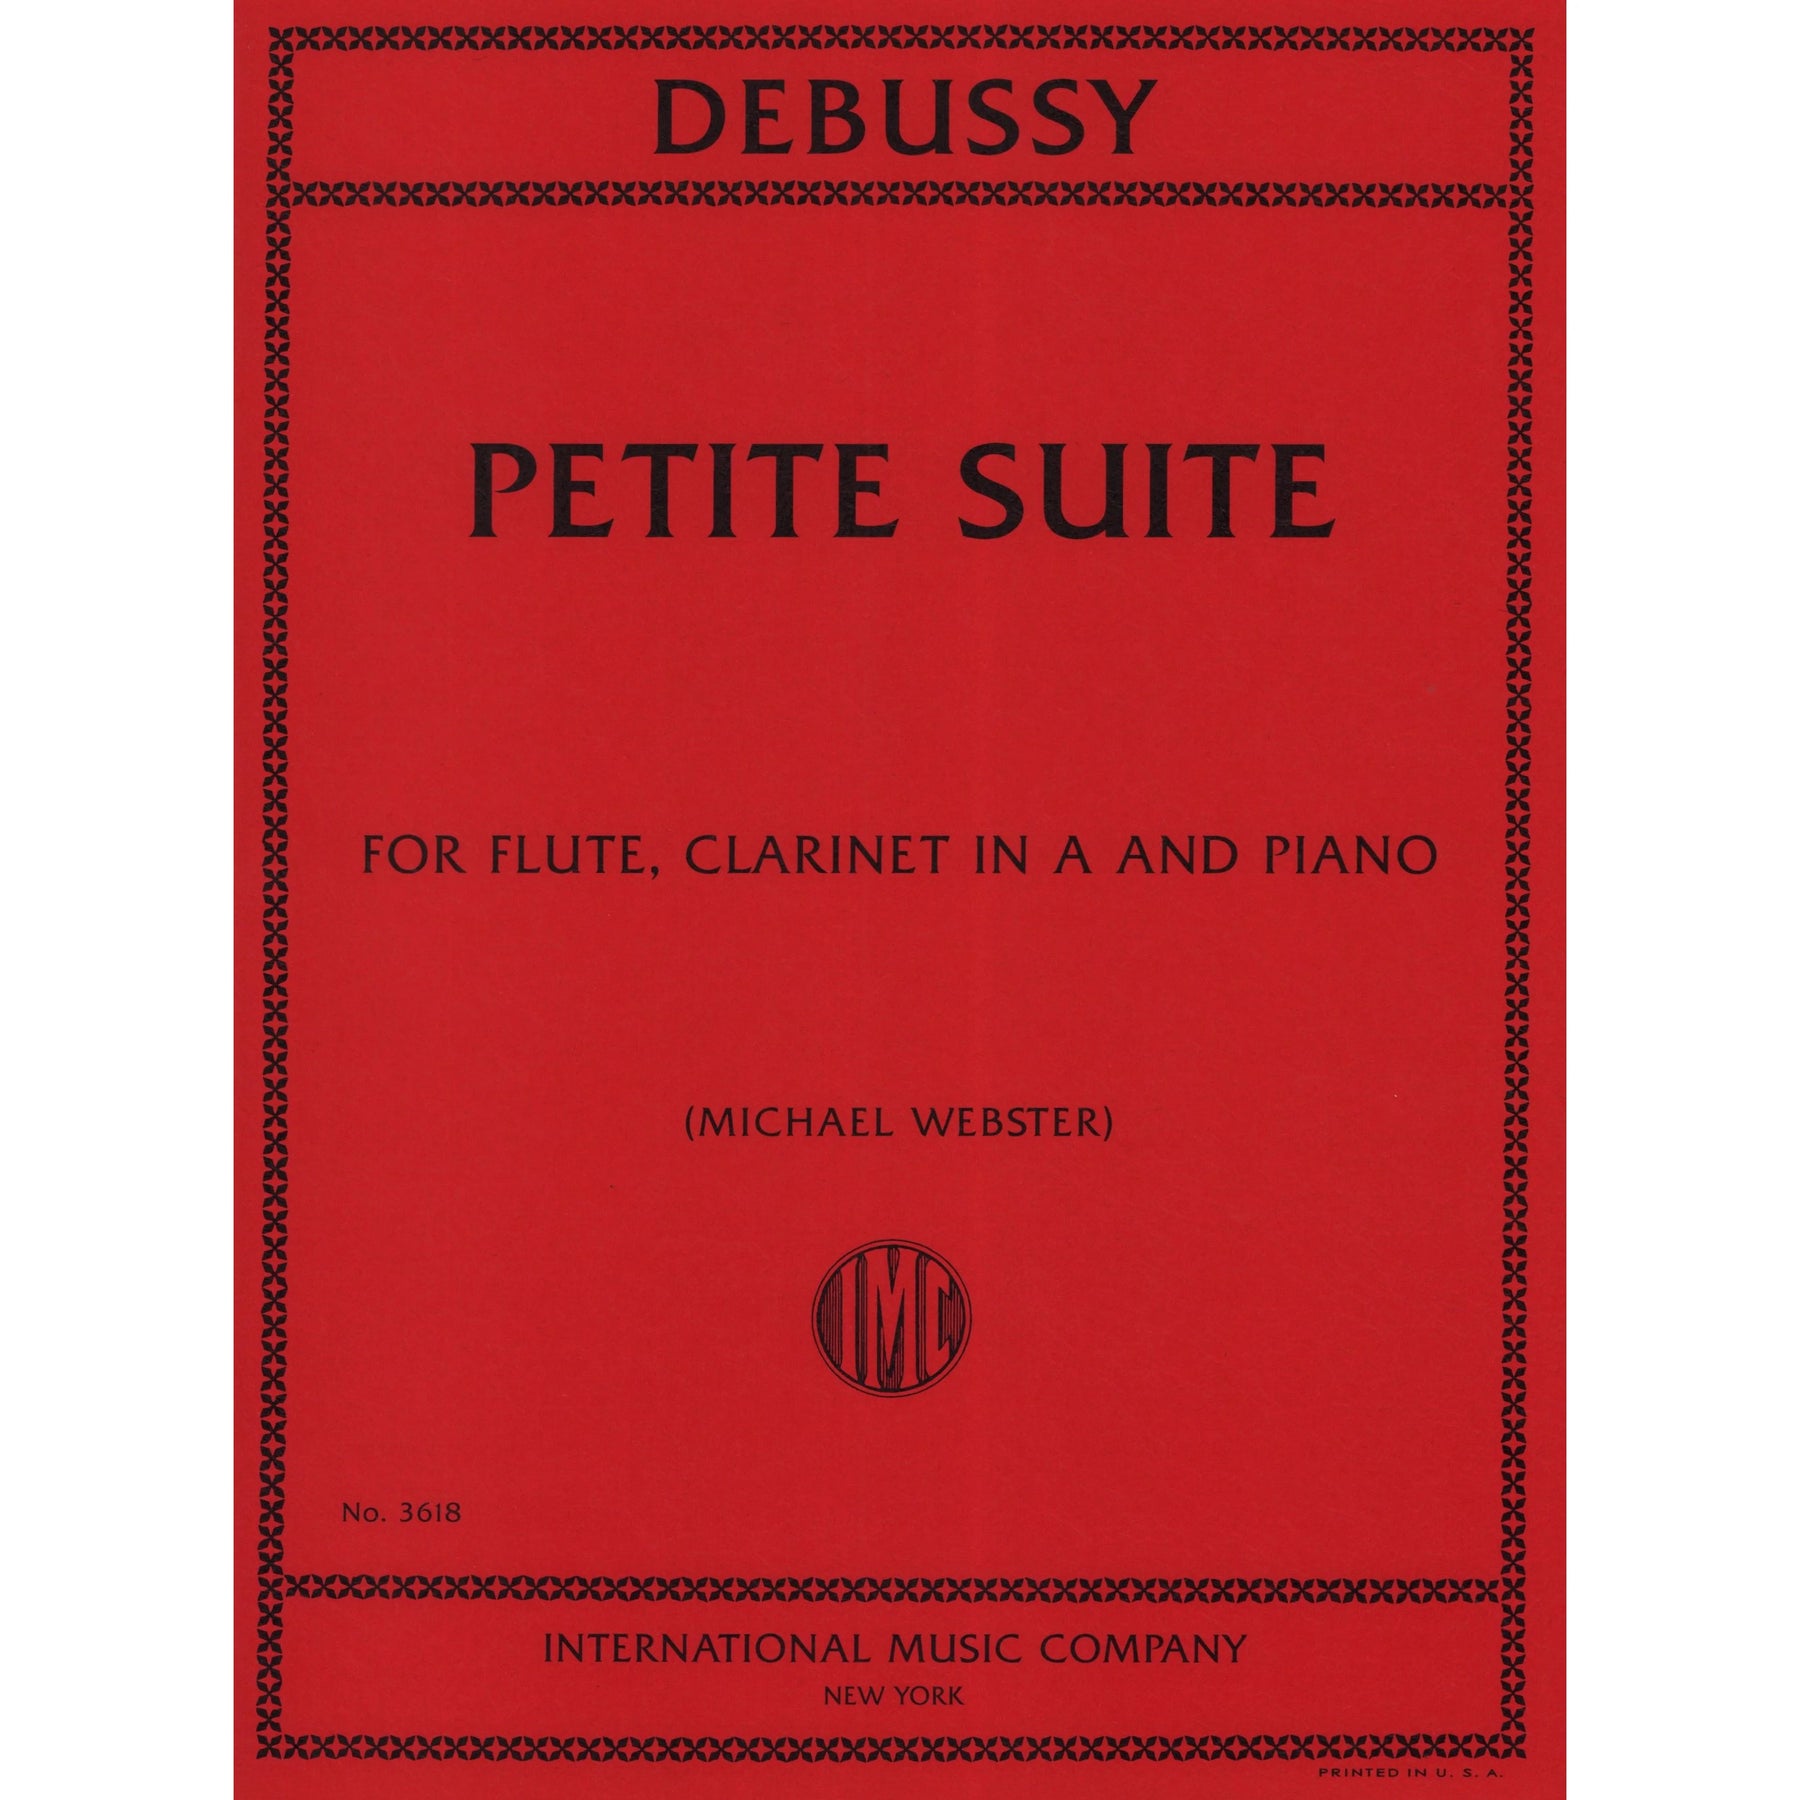 Debussy Petite Suite for Flute, Clarinet in A, and Piano